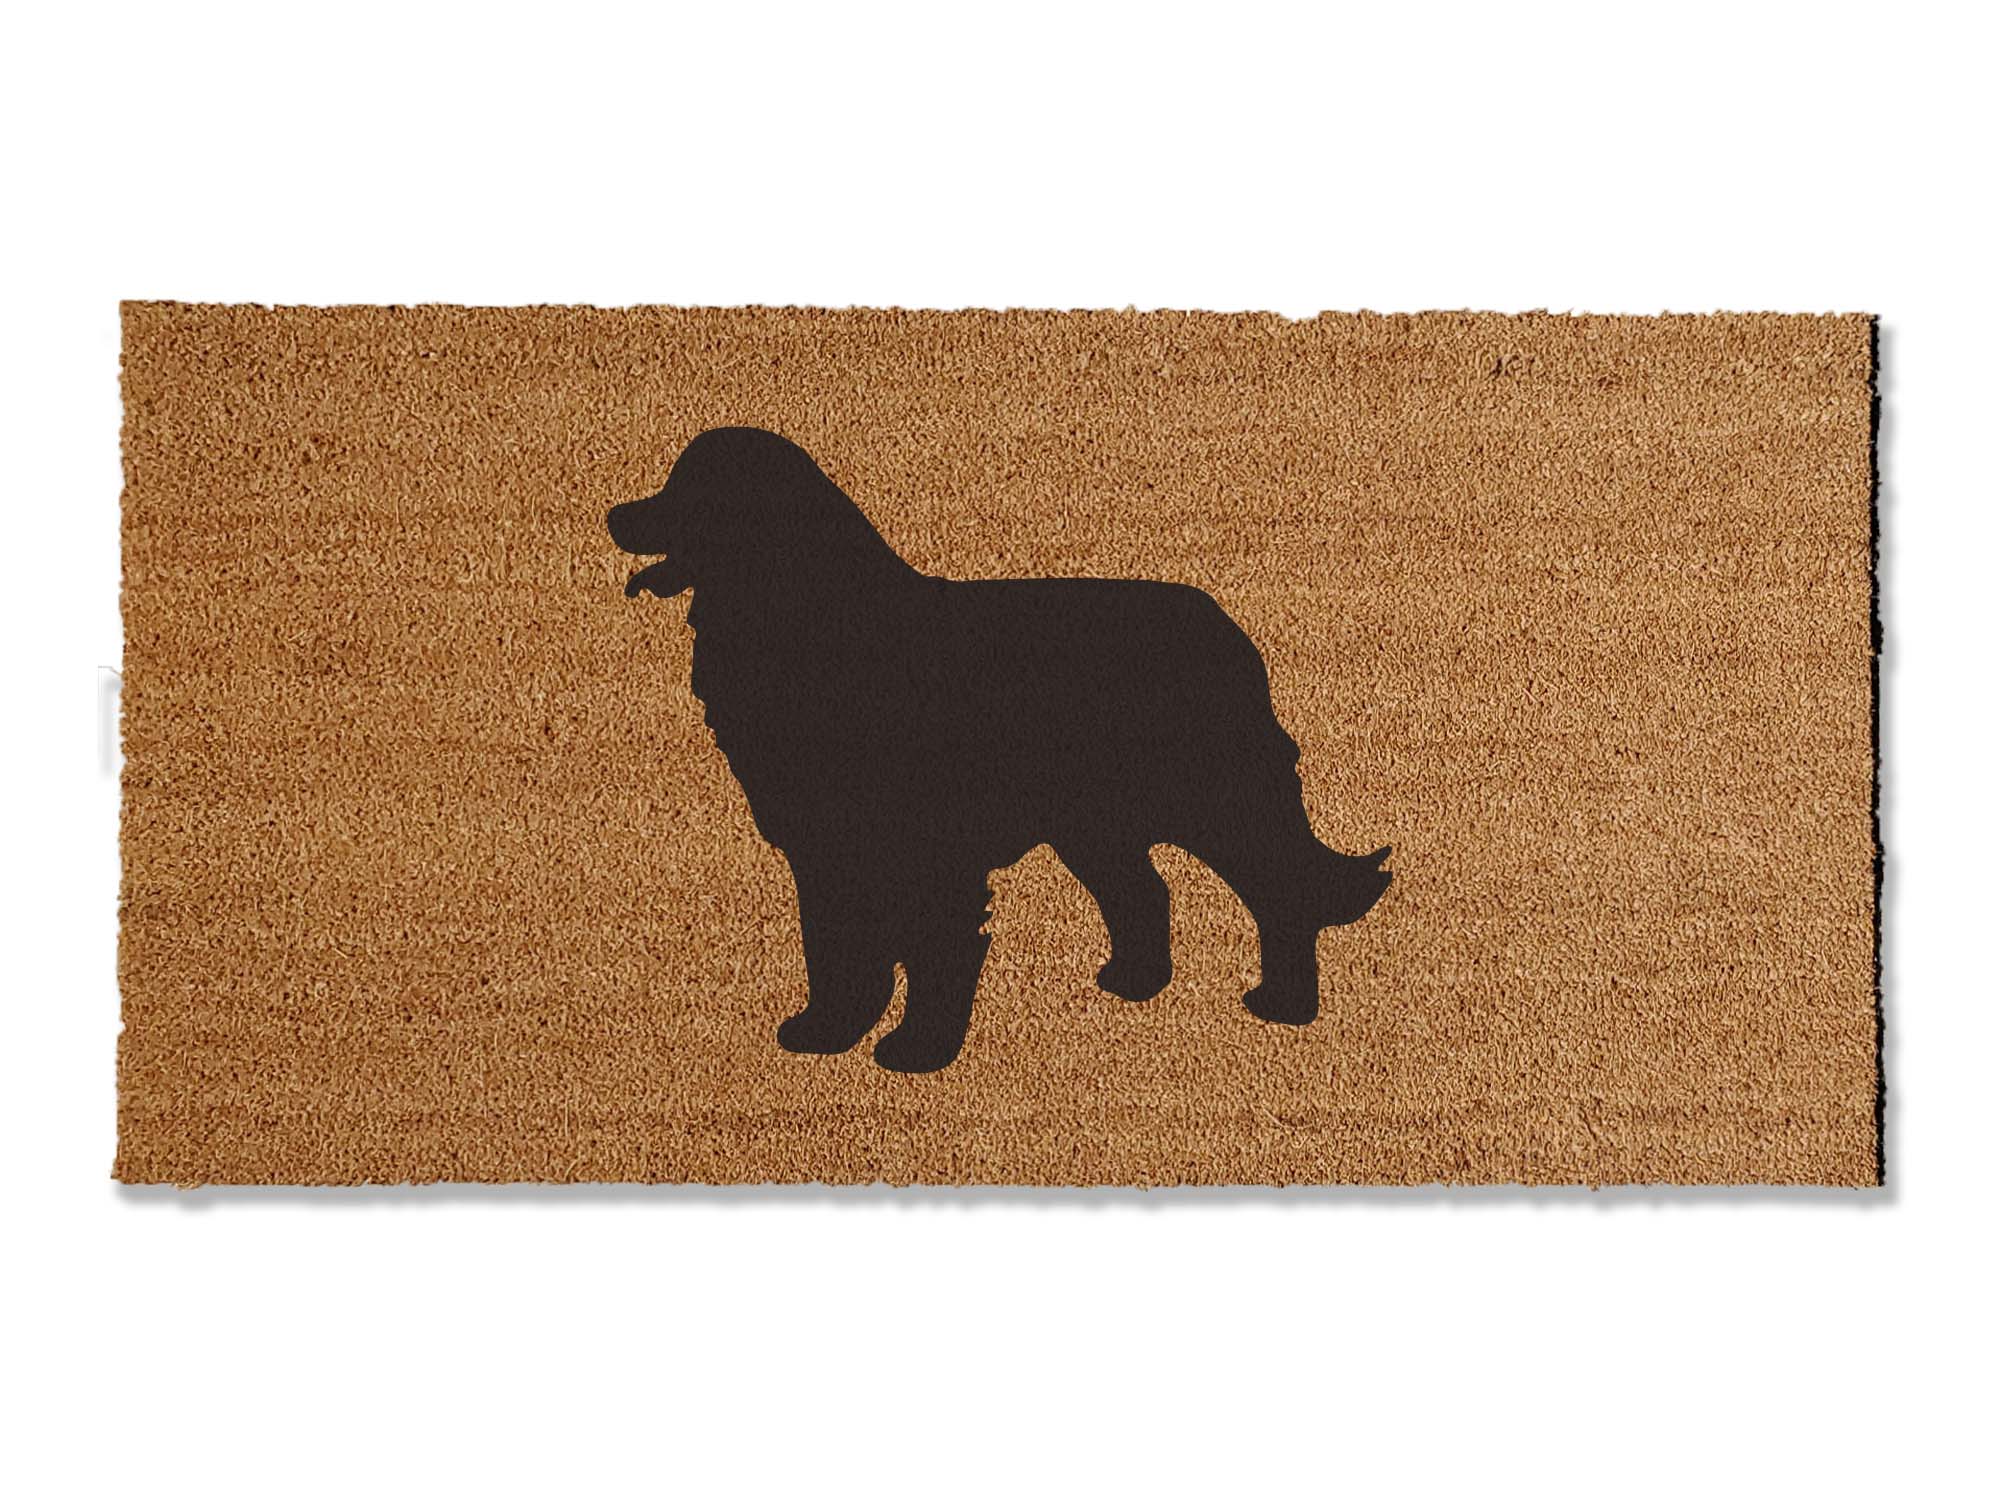 A coir doormat that is 24 inches by 48 inches with the silhouette of a Bernese Mountain Dog painted on it.